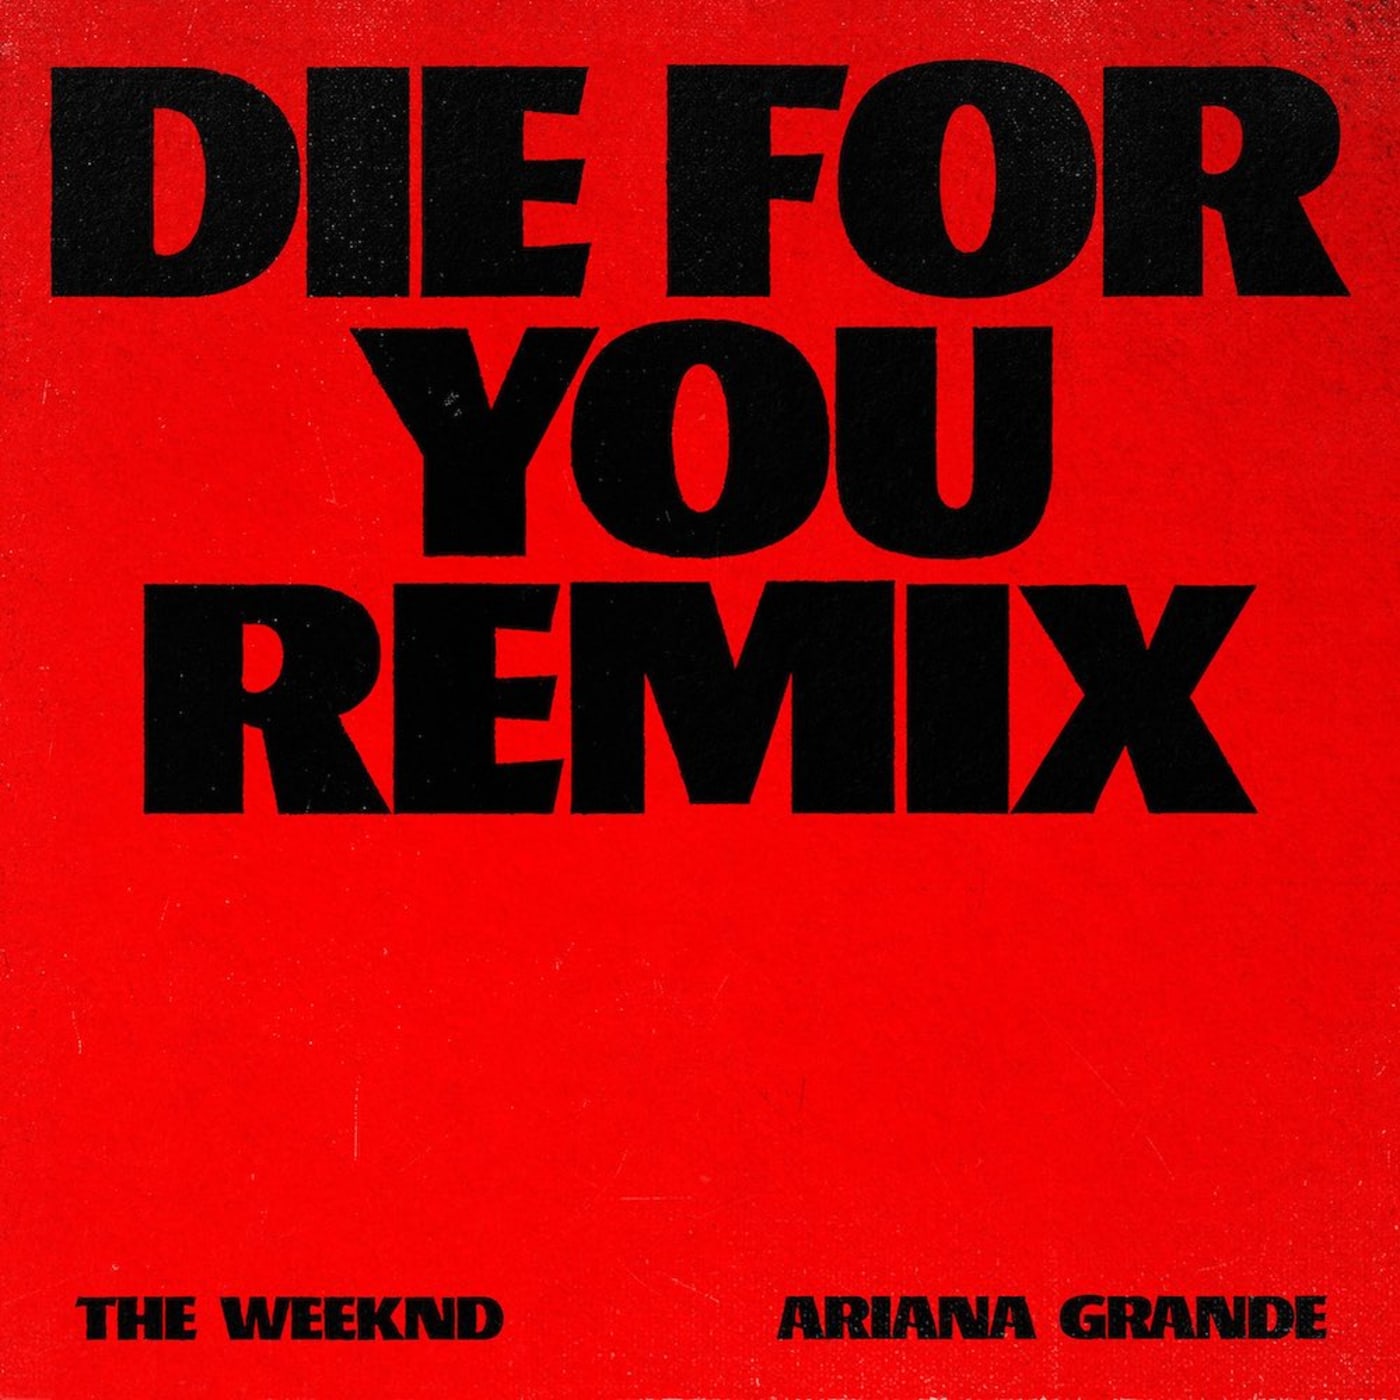 The Weeknd "Die for You" (Remix) f/ Ariana Grande